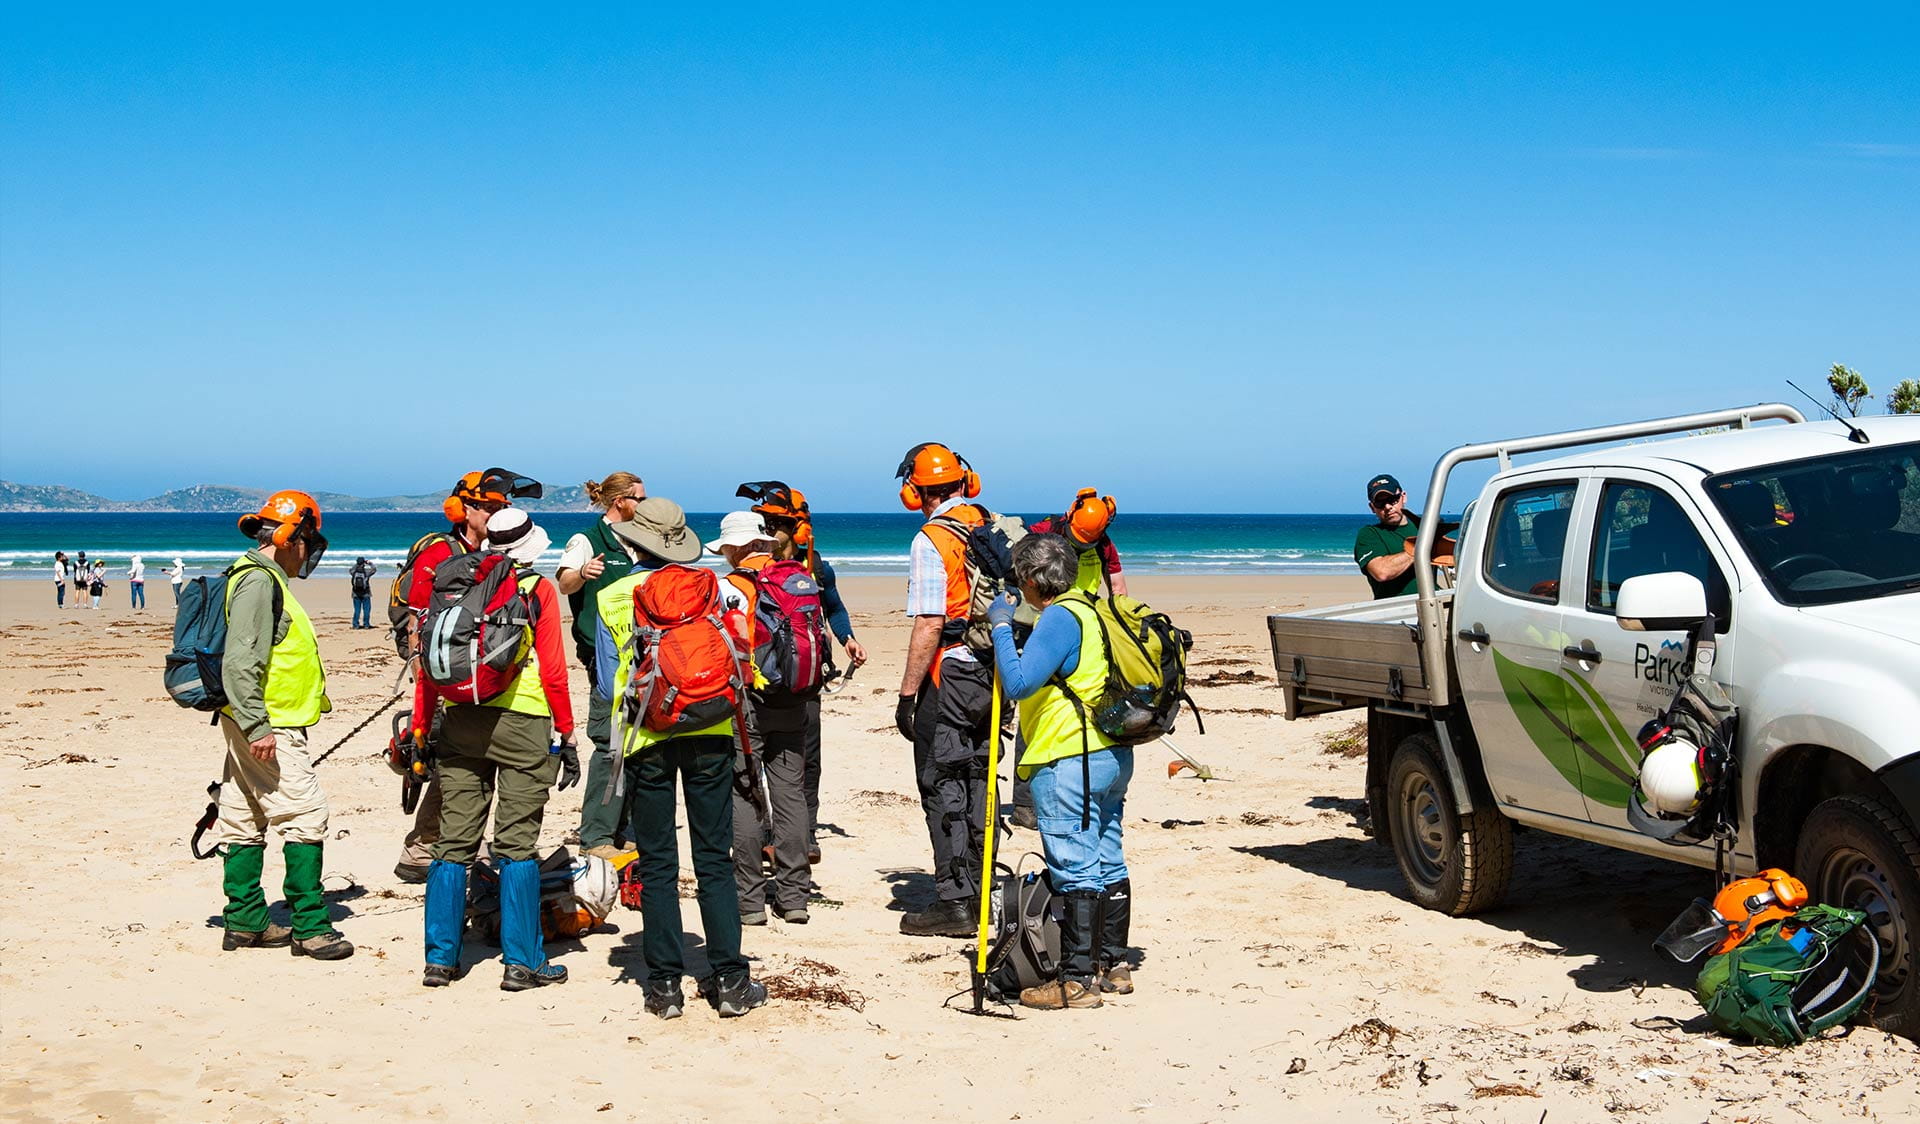 Group of people in high visibility vests gathering next to a Parks Victoria vehicle on a beach